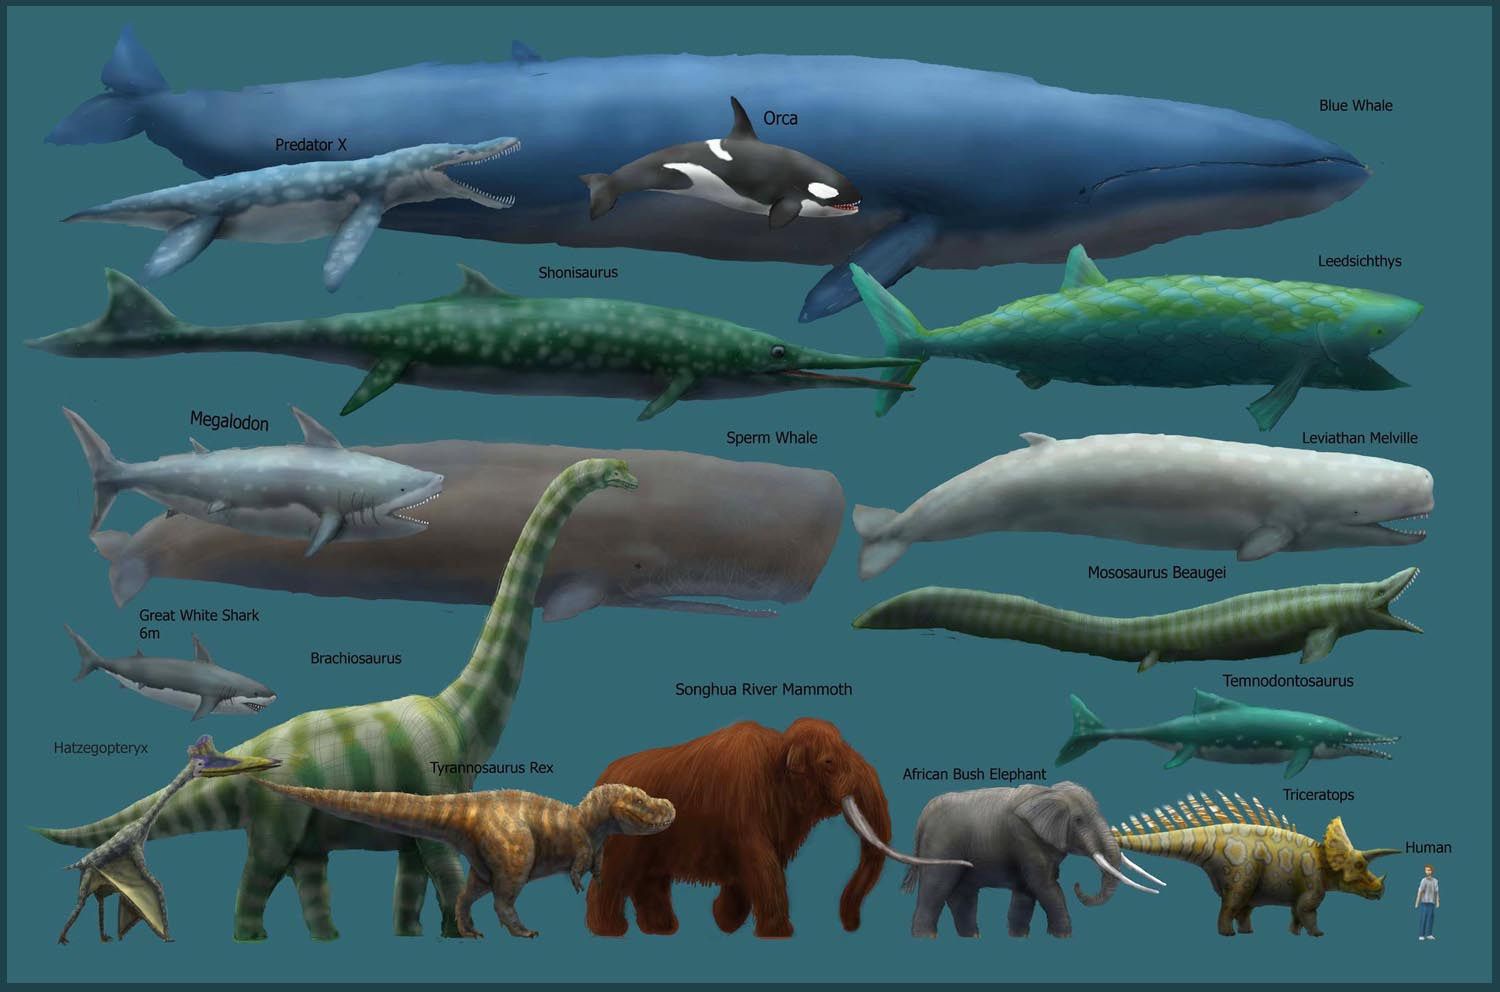 Which fish is bigger than the blue whale?